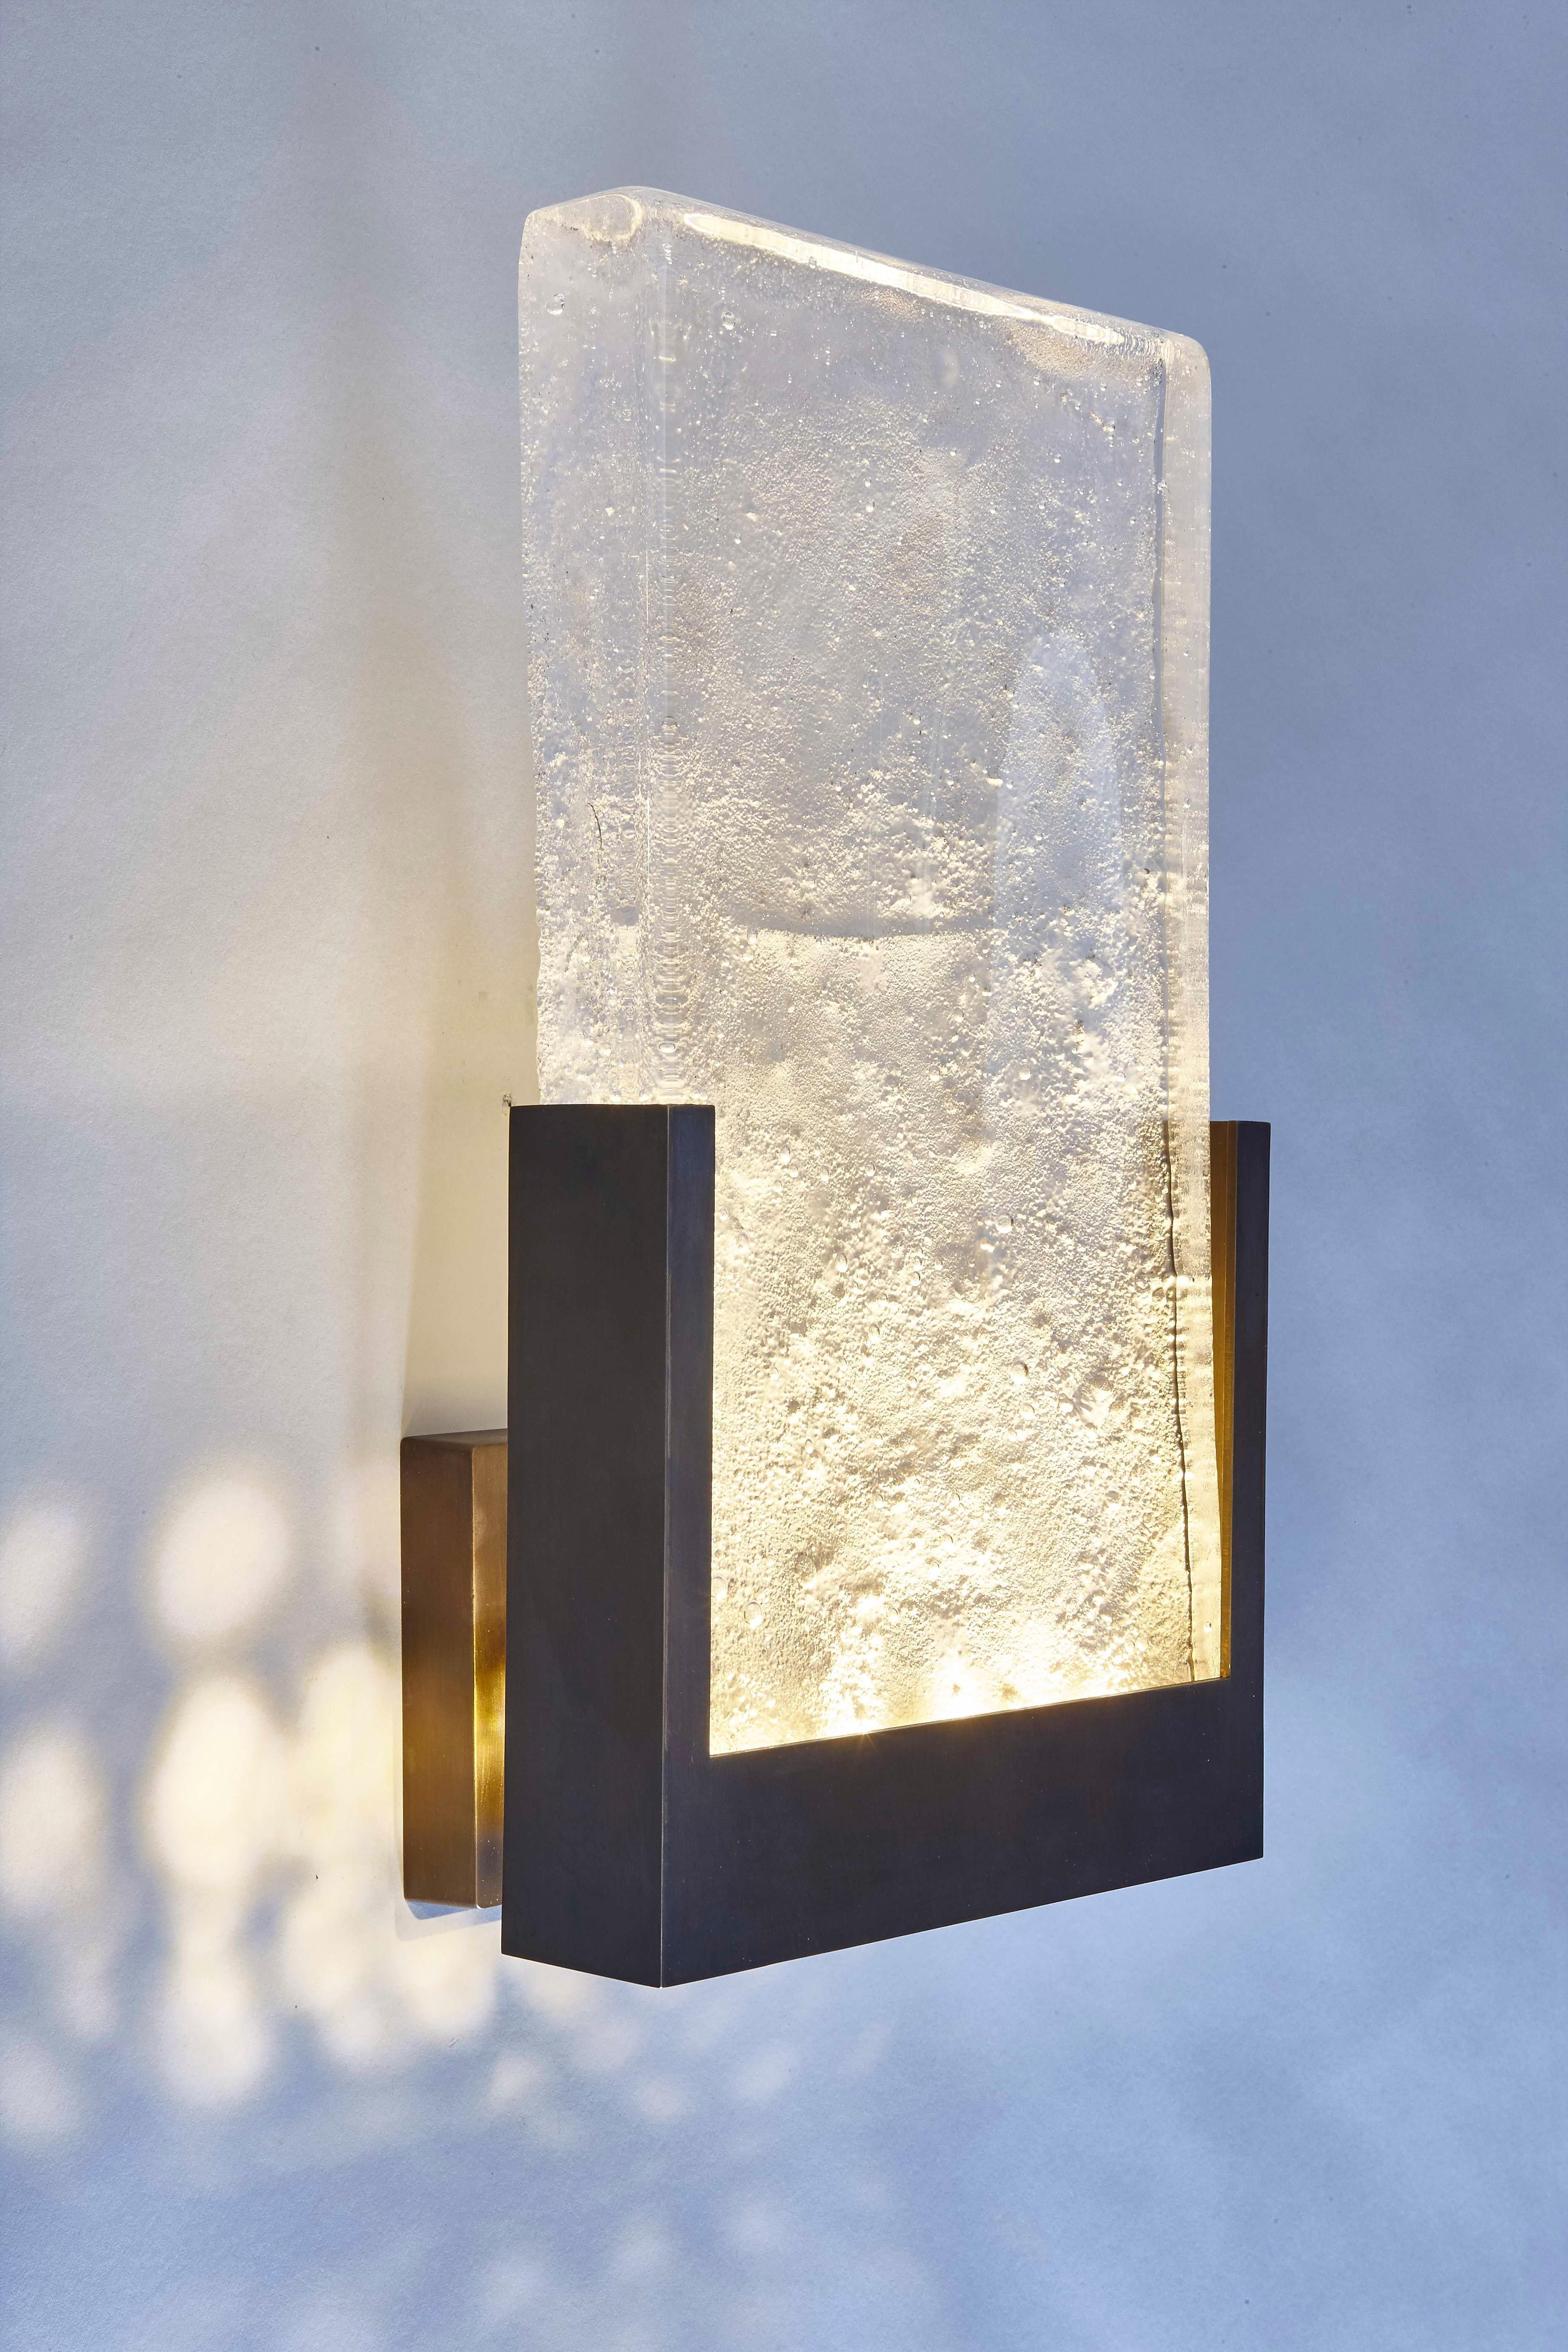 The wall light version of our Eclipse Chandelier. This stunning handcrafted light has strong lines giving a bold statement to any room. The hand-cast glass panel representing the surface of the moon, sits in a bronze frame and creates a wonderfully